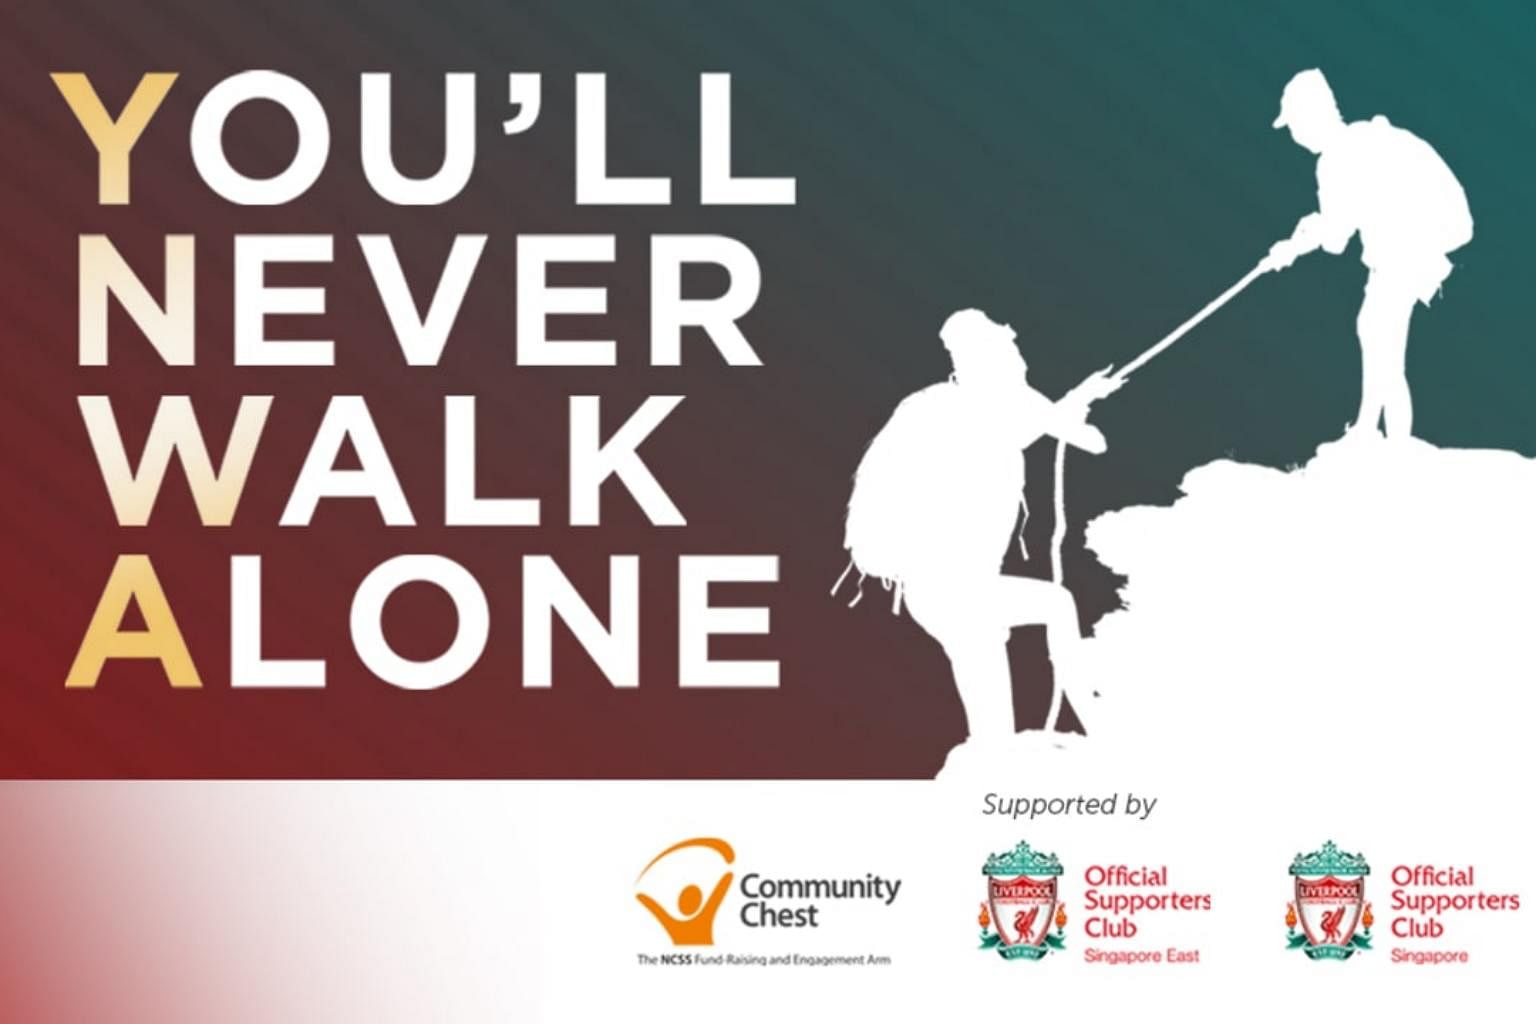 You Ll Never Walk Alone Say Liverpool Fans Raising Funds For Community Chest Campaign Sport News Top Stories The Straits Times